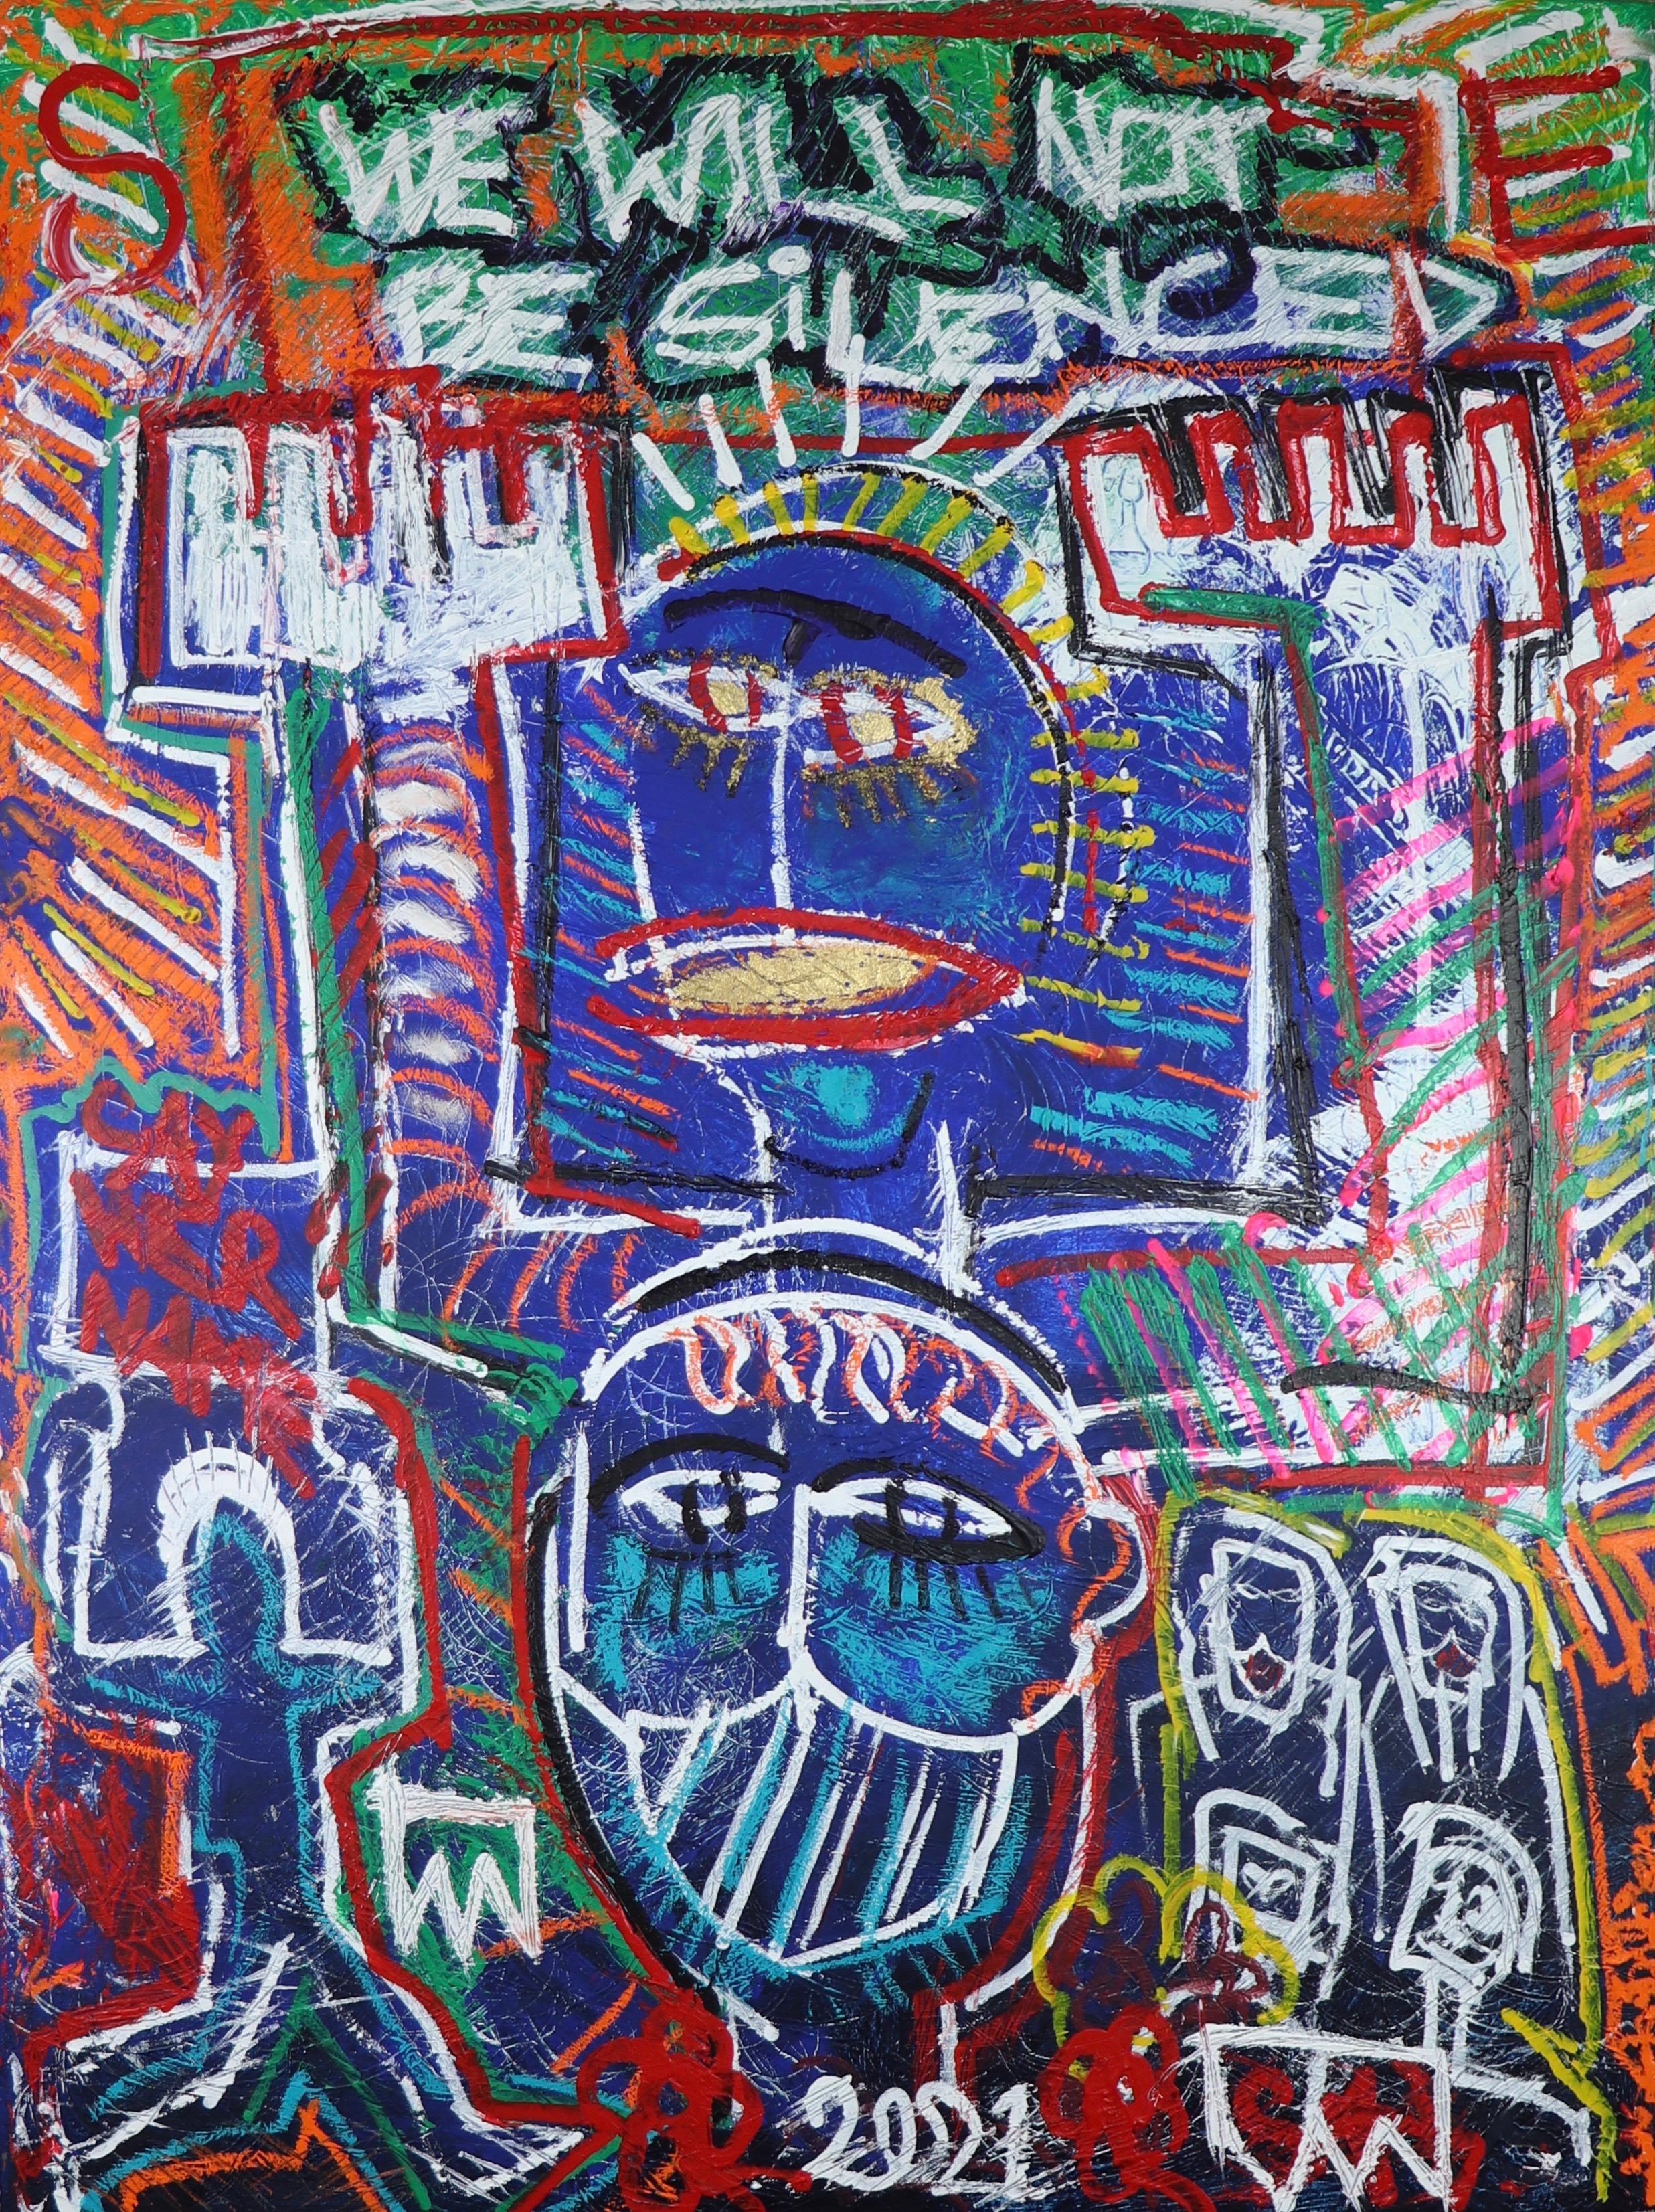 WE WILL PAS BE SiLENCED (The Golden Voice).   Peinture néo-expressionniste